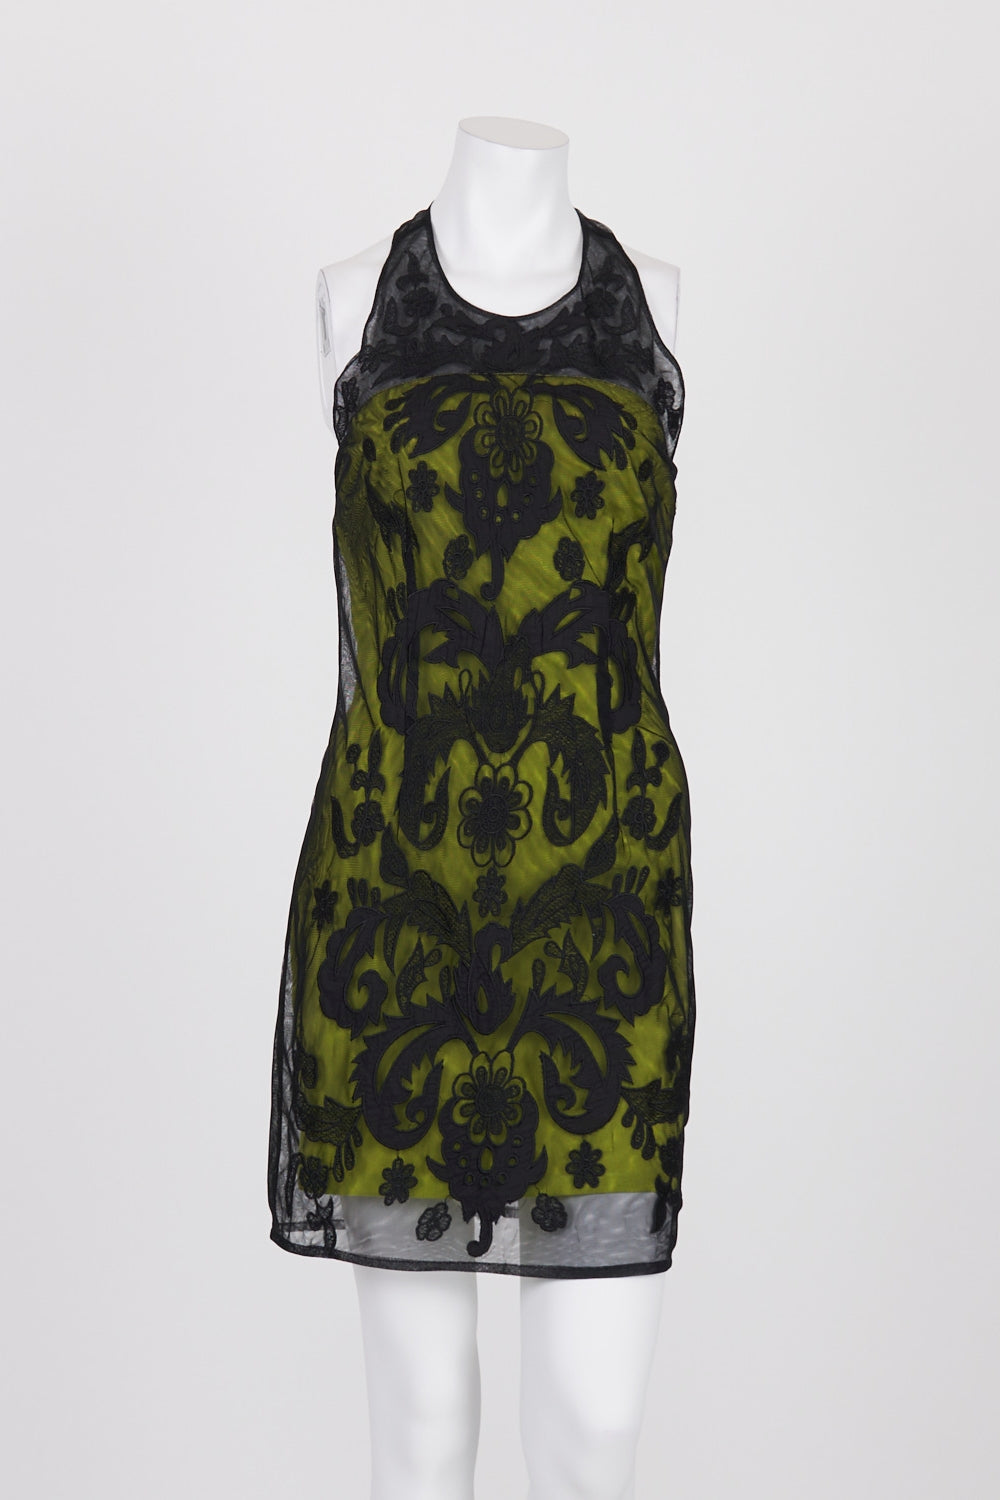 Lumier Black And Lime Embroidered Mesh Dress S